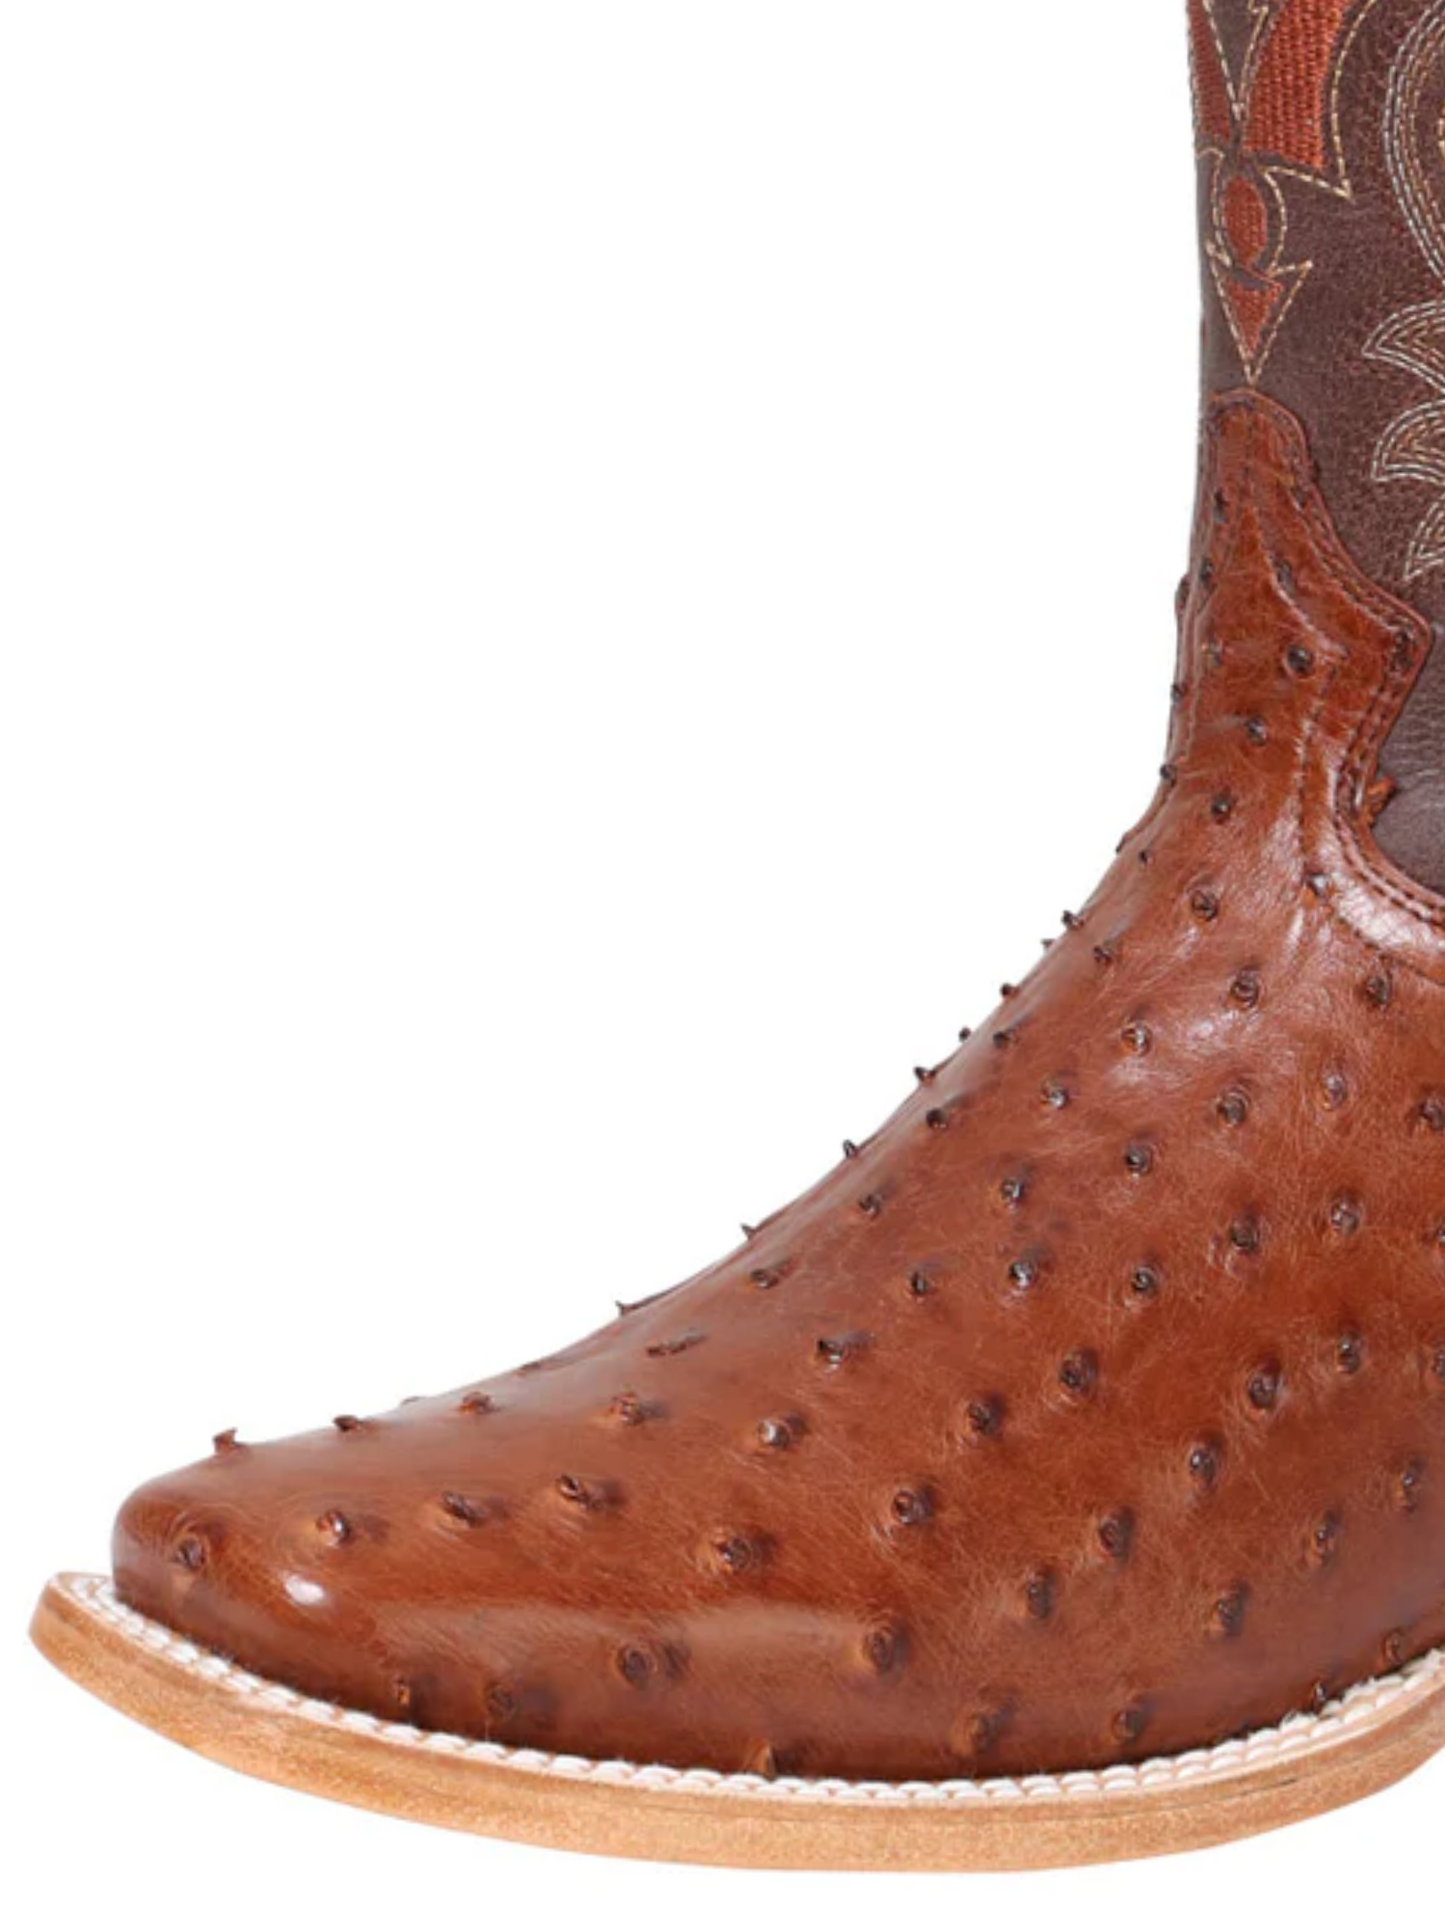 Original Ostrich Rodeo Exotic Cowboy Boots for Men '100 Years' - ID: 42770